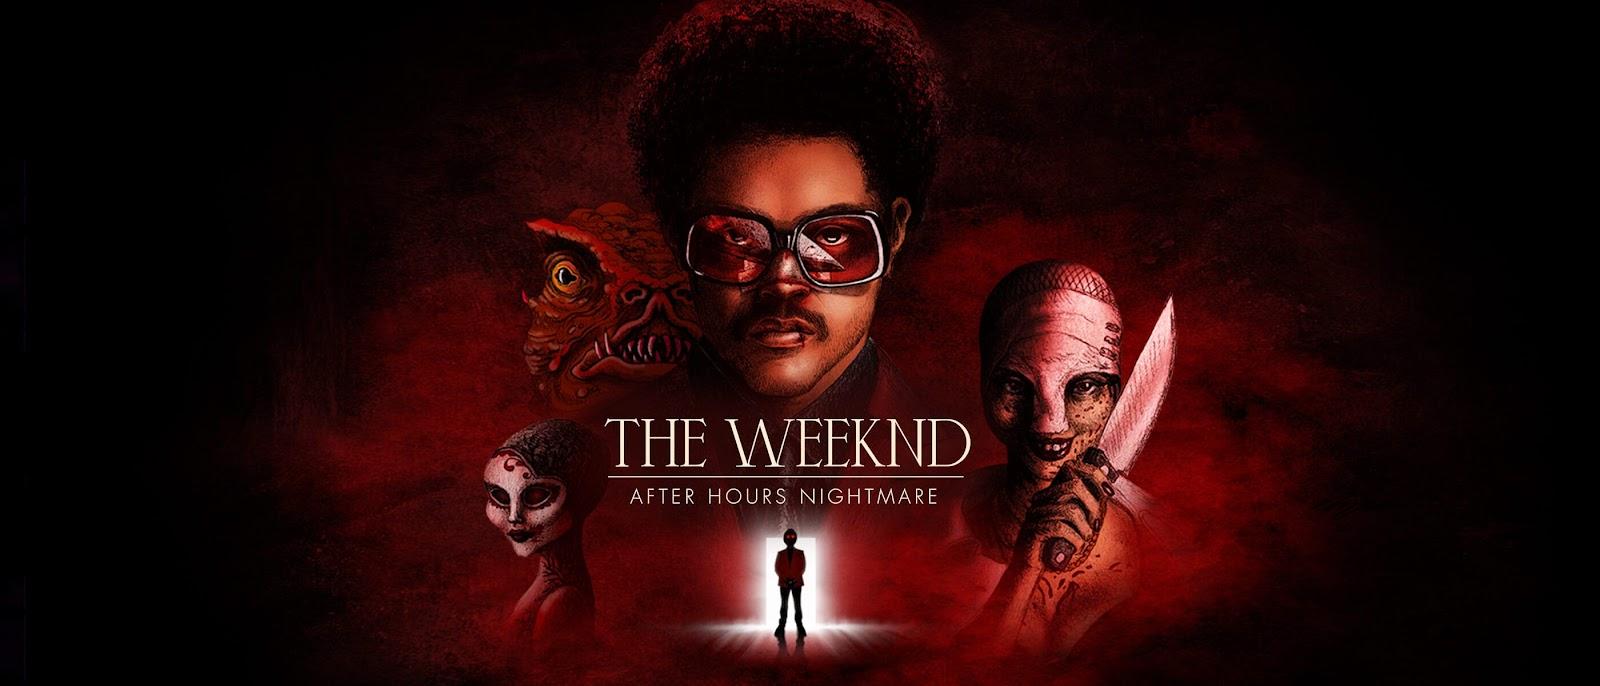 The Weeknd: After Hours Nightmare with the artist surrounded by demonic figures and a silhouette of himself in a doorway.